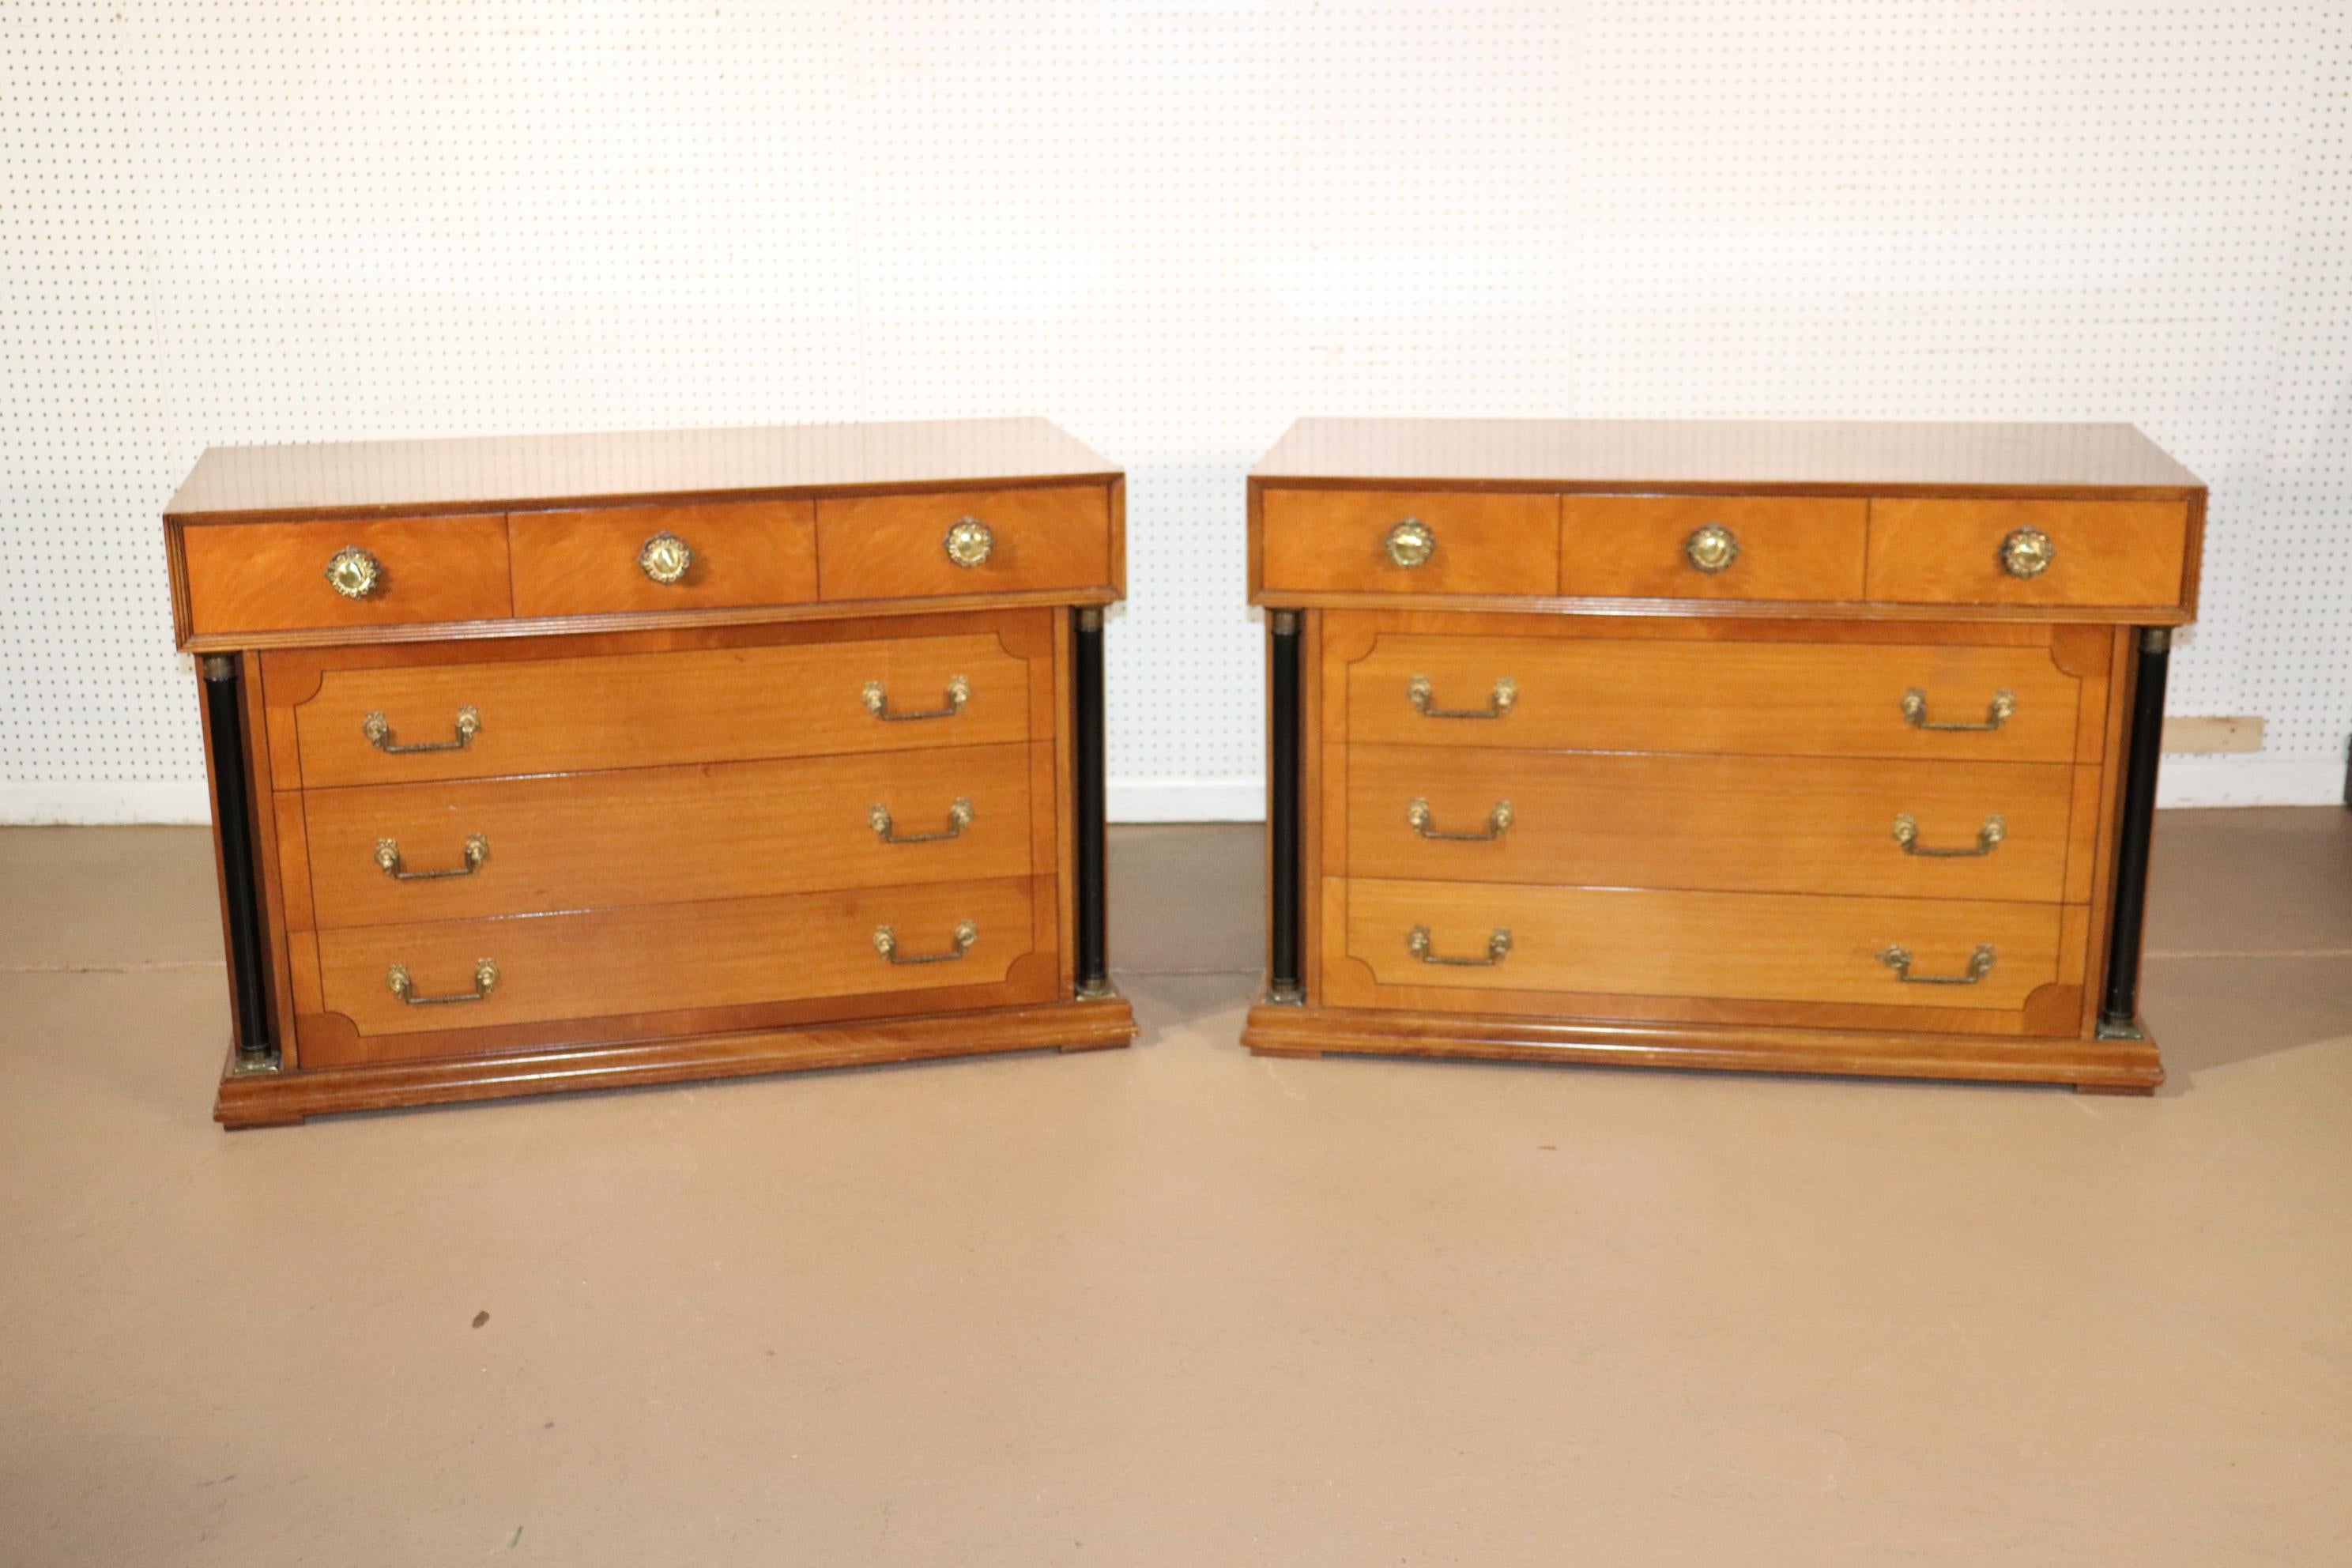 These each measure 48 inches wide x 22 inches deep and 33 inches tall. The commodes are in good condition and have mild signs of wear and use.